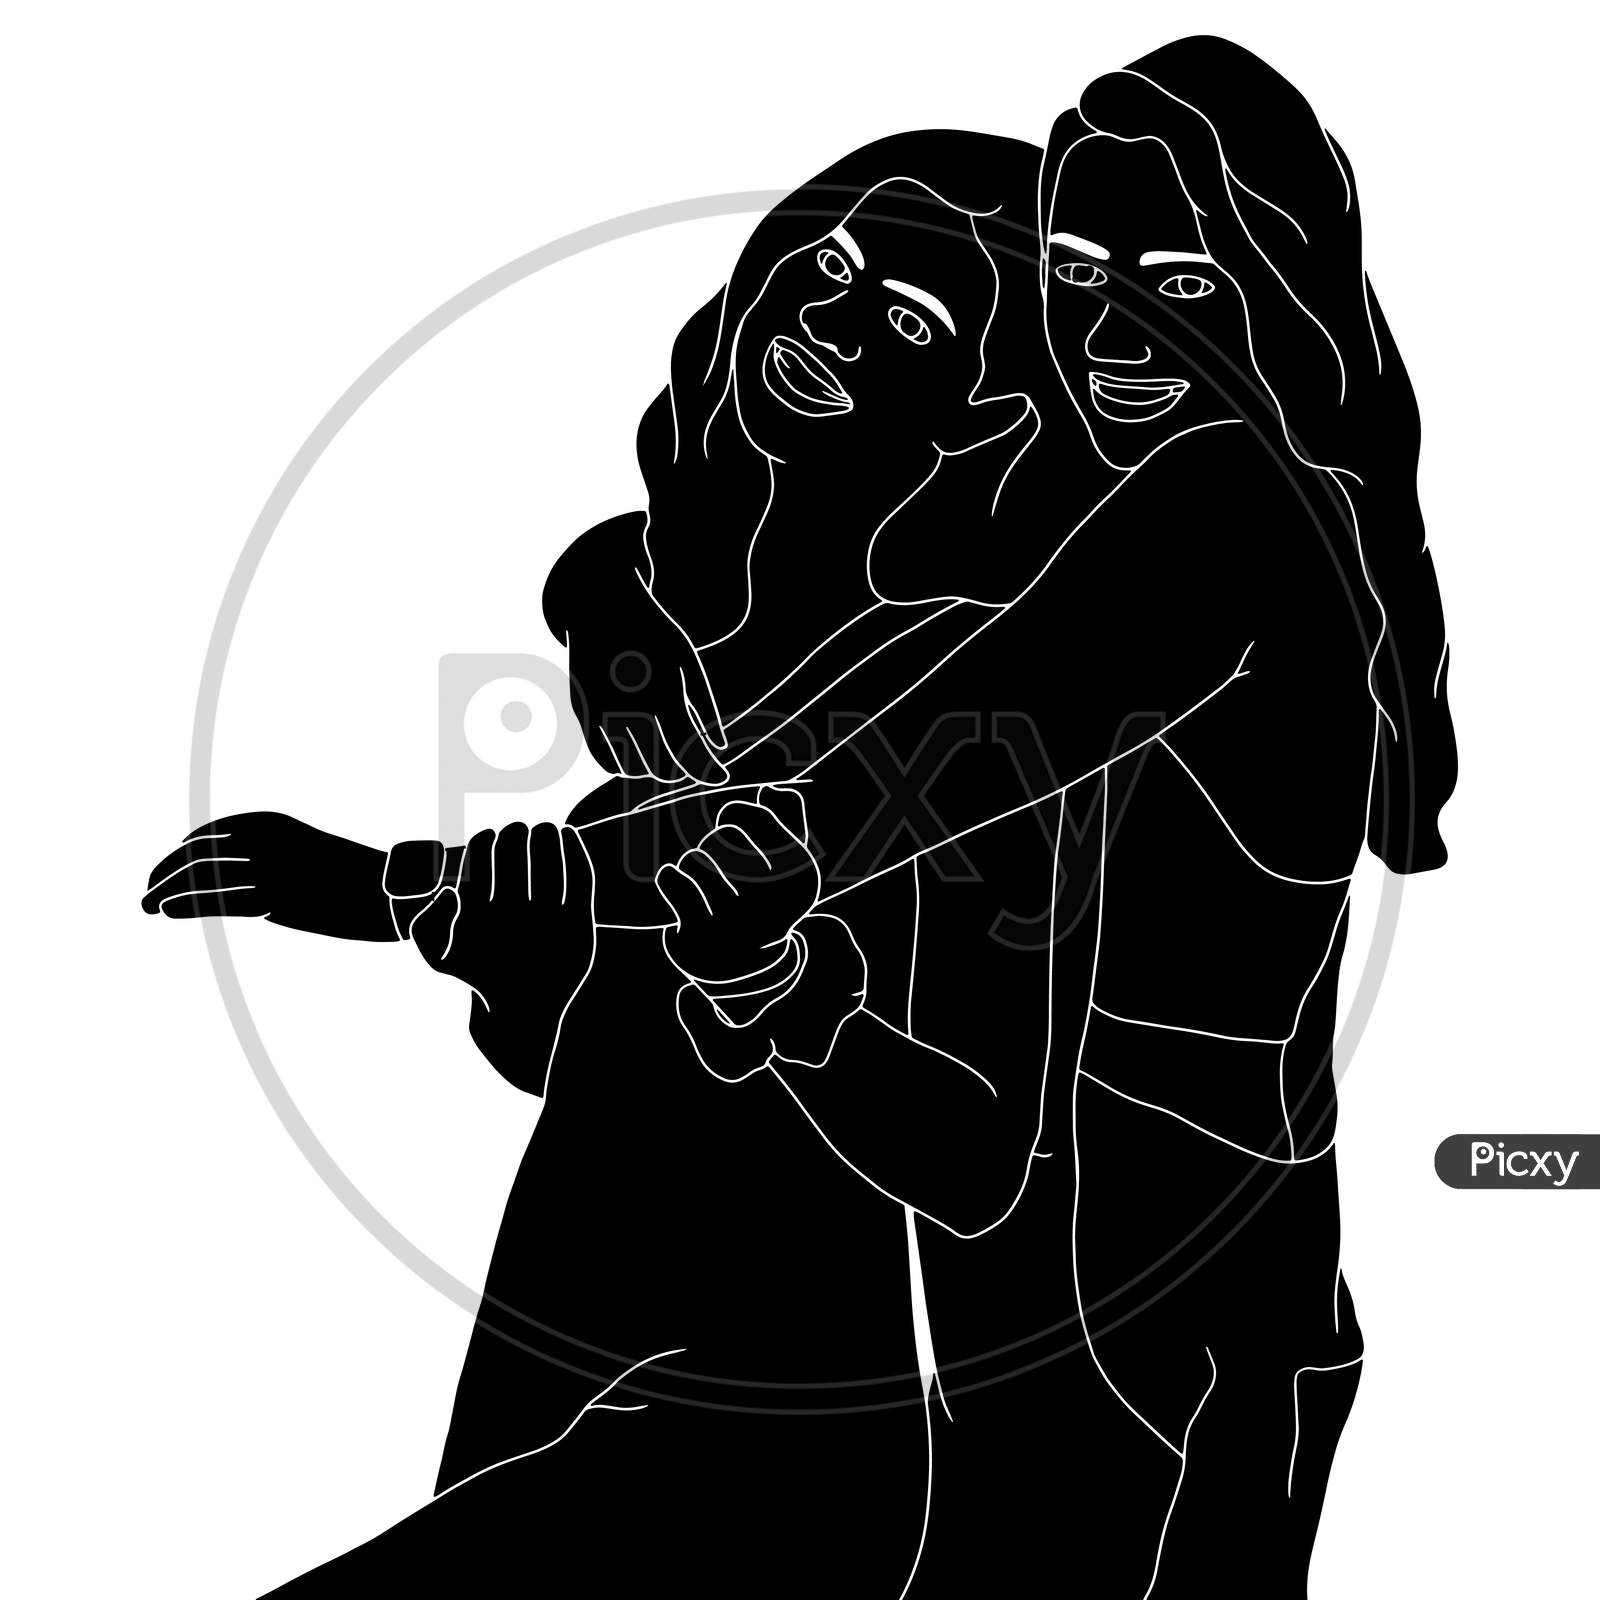 A Beautiful Relationship Of Two Girls, Best Friends Forever, The Silhouette Of People For Friendship Day. Hand-Drawn Character Illustration Of Happy People.